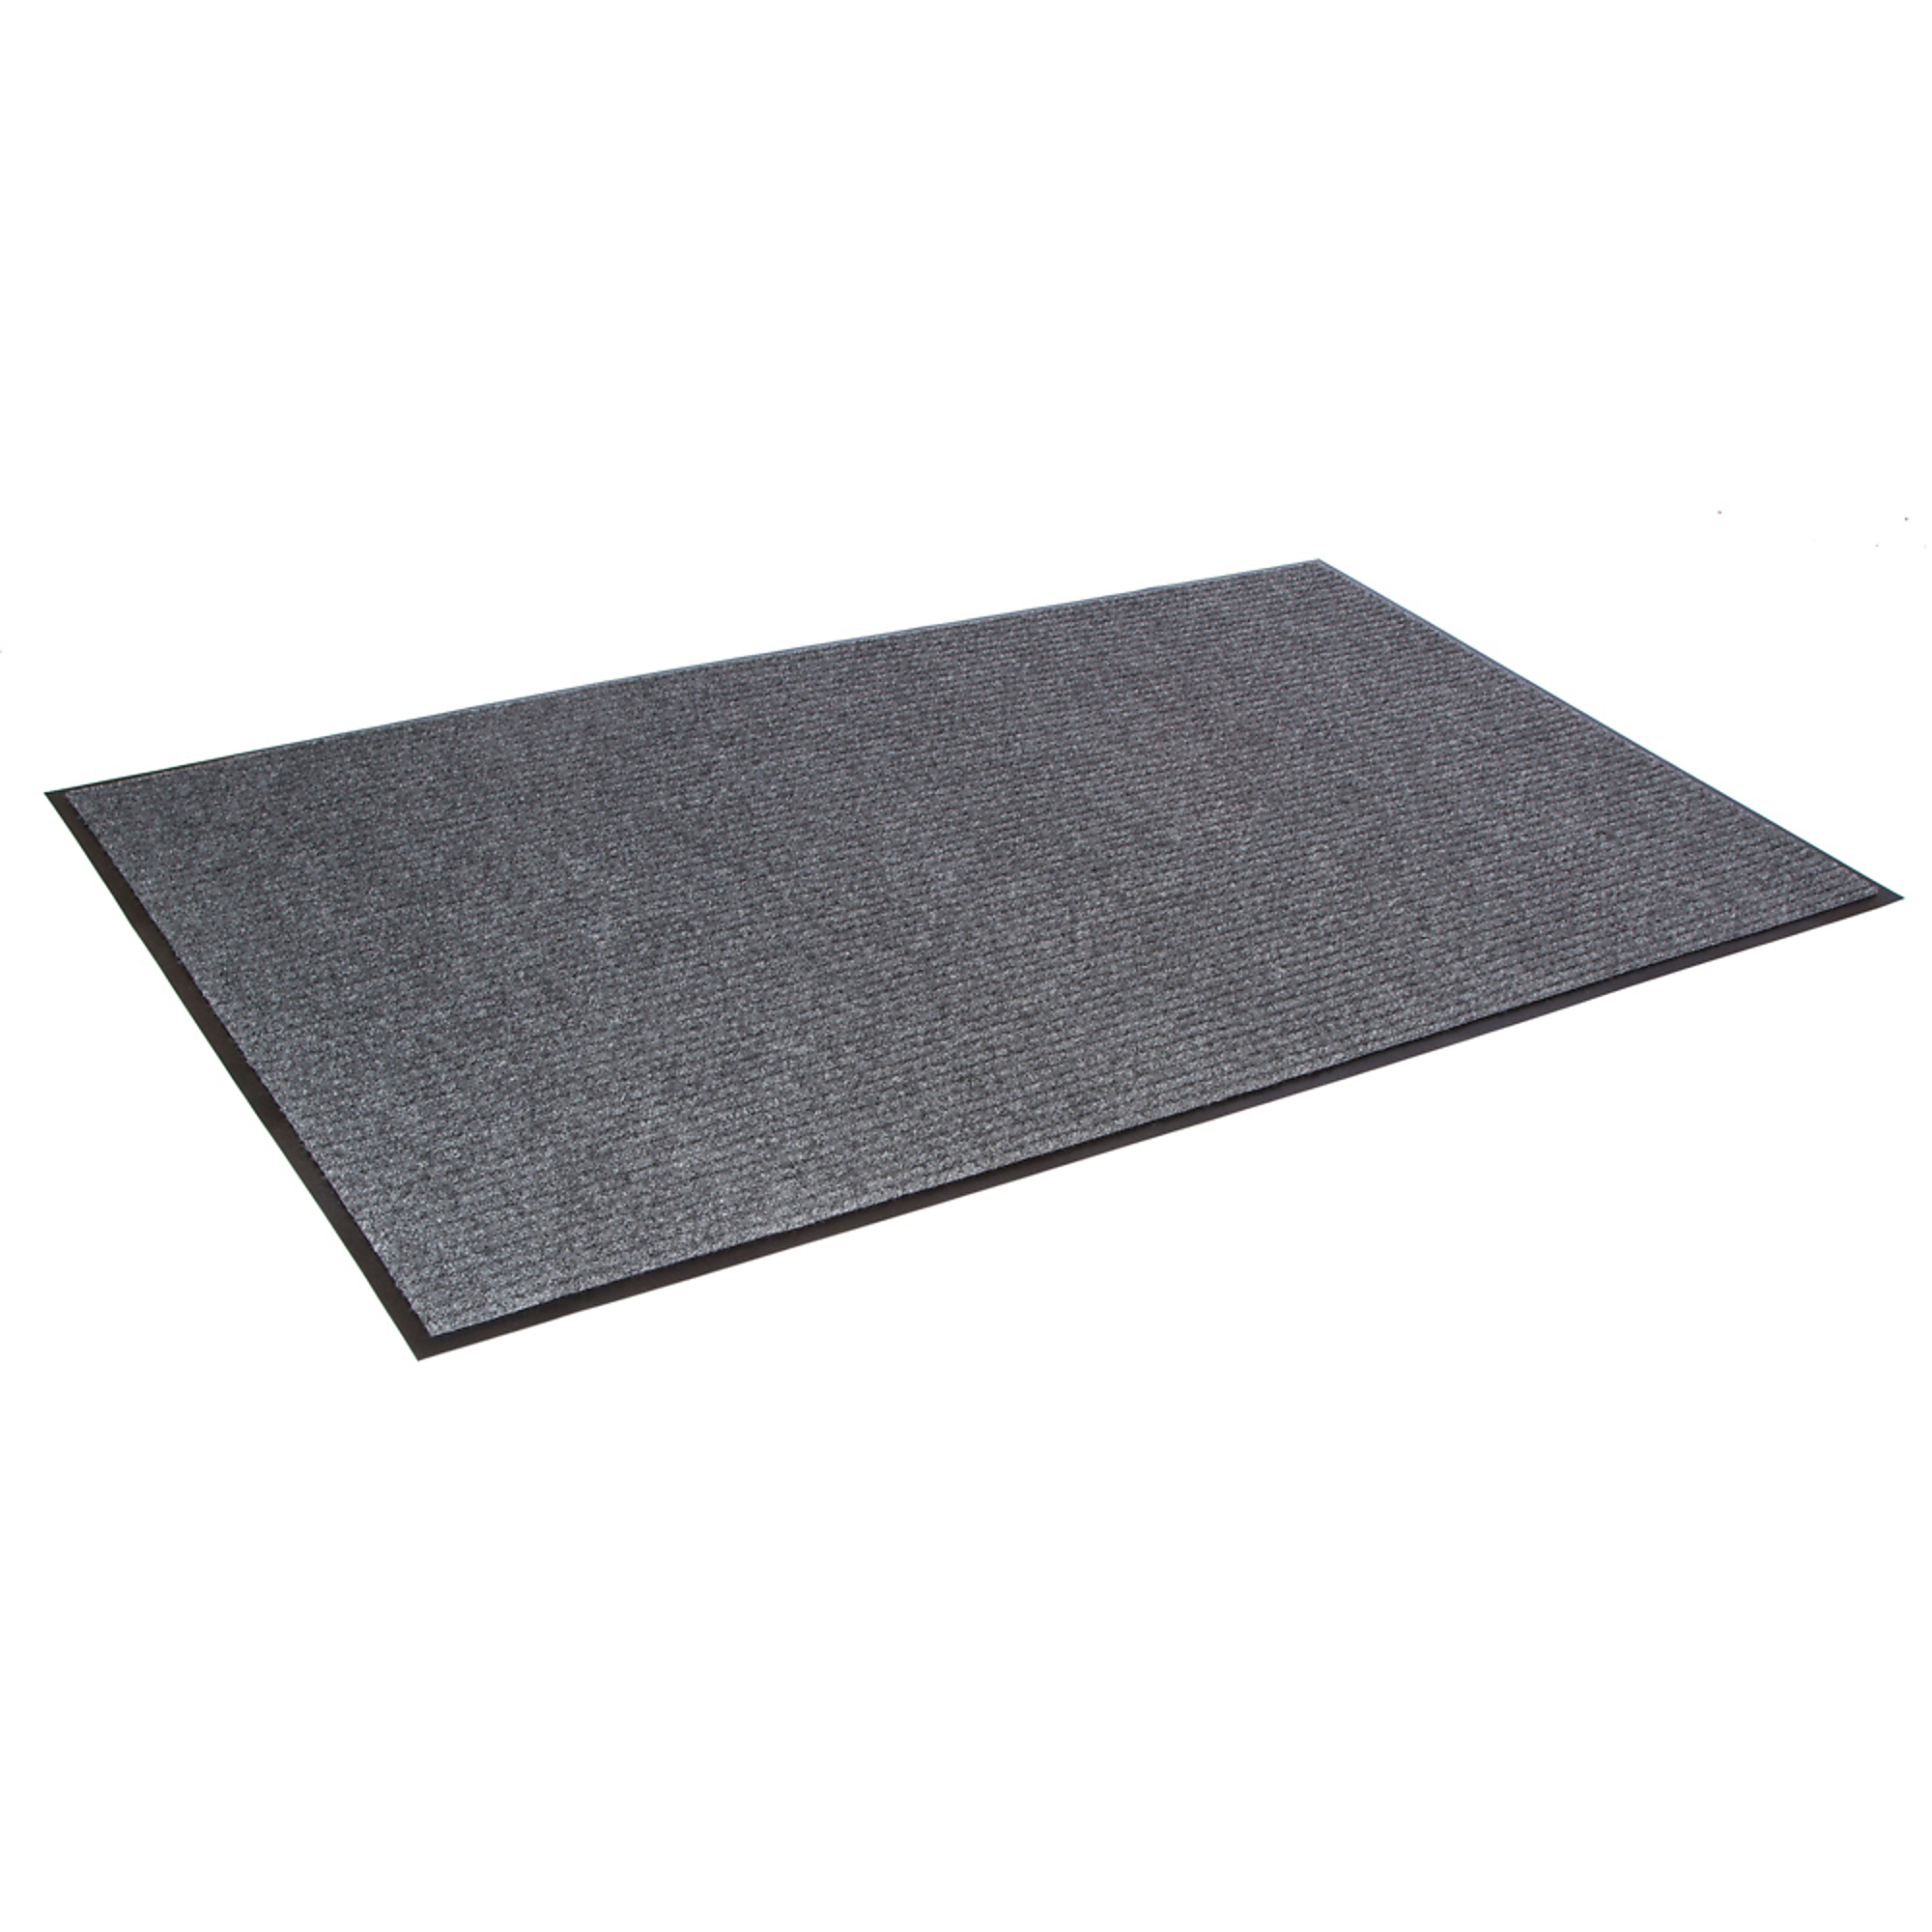 Crown Matting Technologies, Needle-Rib 2ft.x3ft. Gray, Width 24 in, Length 36 in, Thickness 5/16 in, Model NR 0023GY